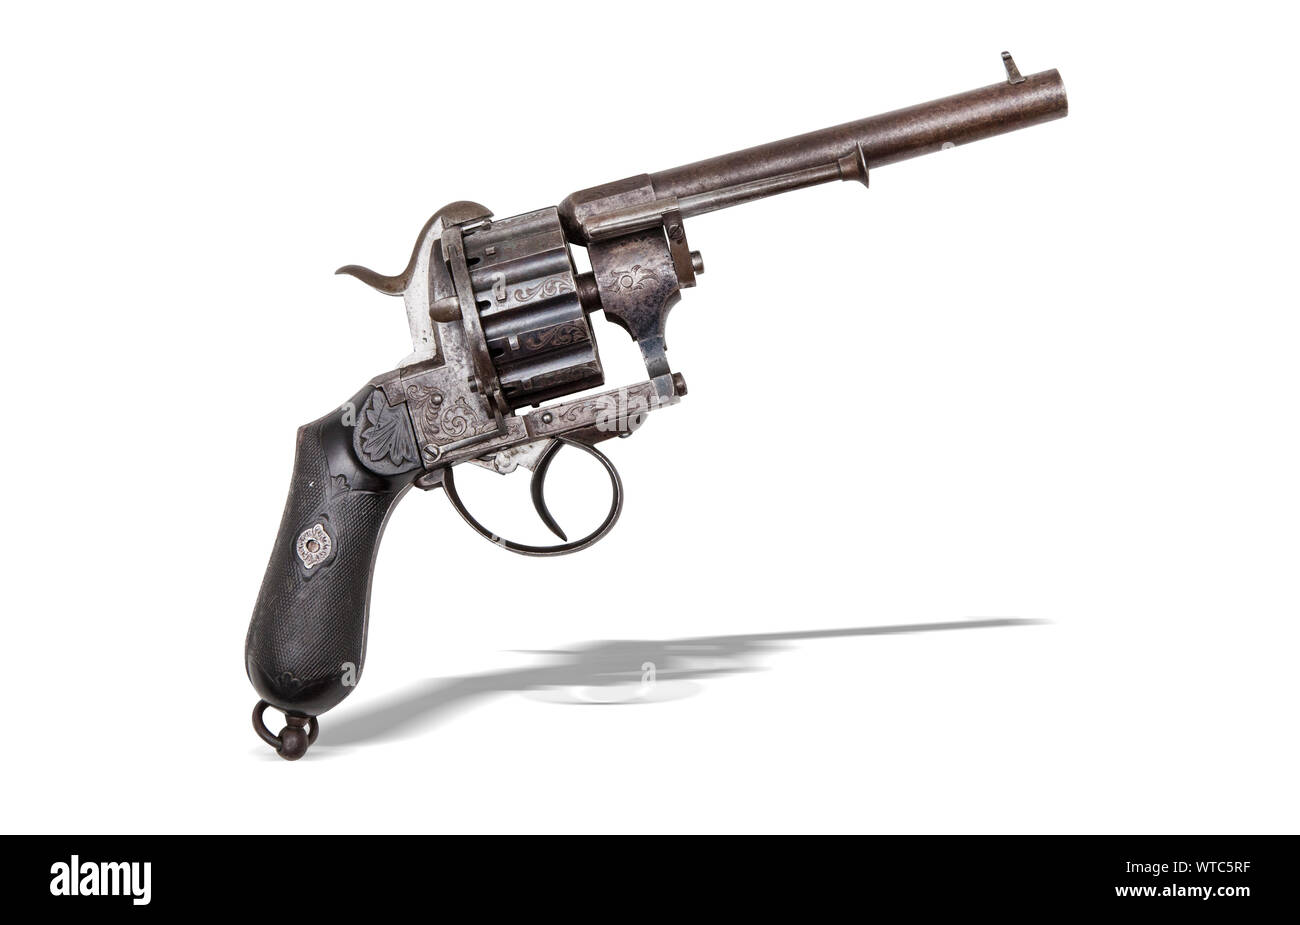 French J. Chaineux 12 shot pinfire revolver, CA. 1860, barrel: 6”, 36 cal., double action revolver, with fine engraving on the octagon barrel section. Stock Photo